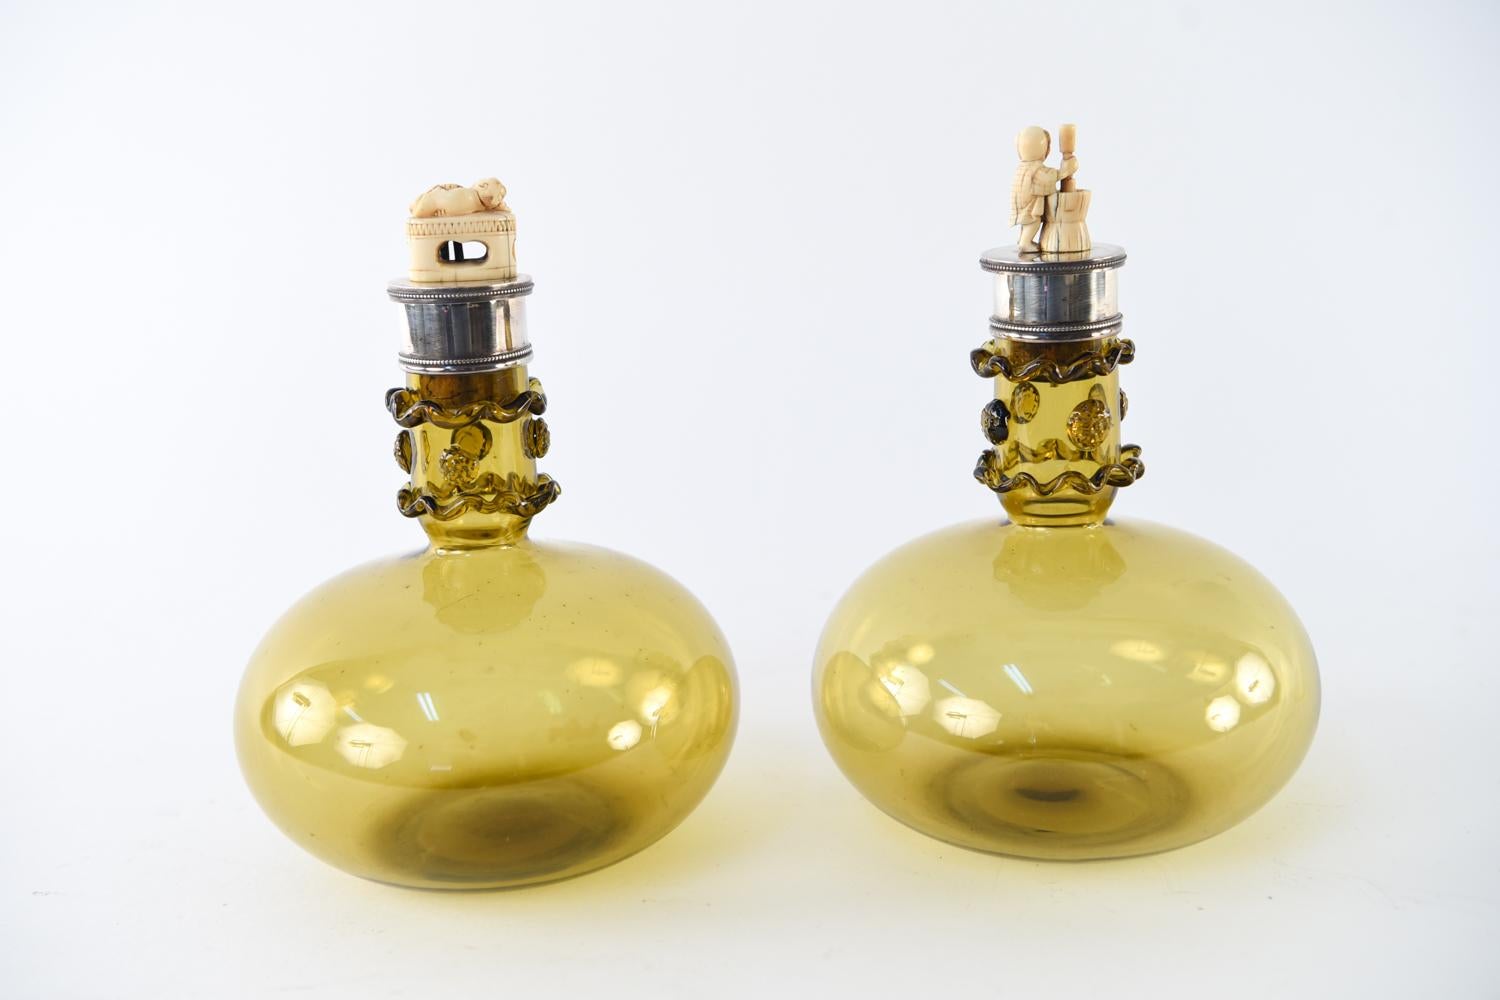 This spectacular pair of decanters dates to the Aesthetic Movement in Victorian England, circa 1886. Their amber glass bodies feature hand-applied decoration at the neck and beaded sterling silver collars. Each sterling and cork stopper is topped